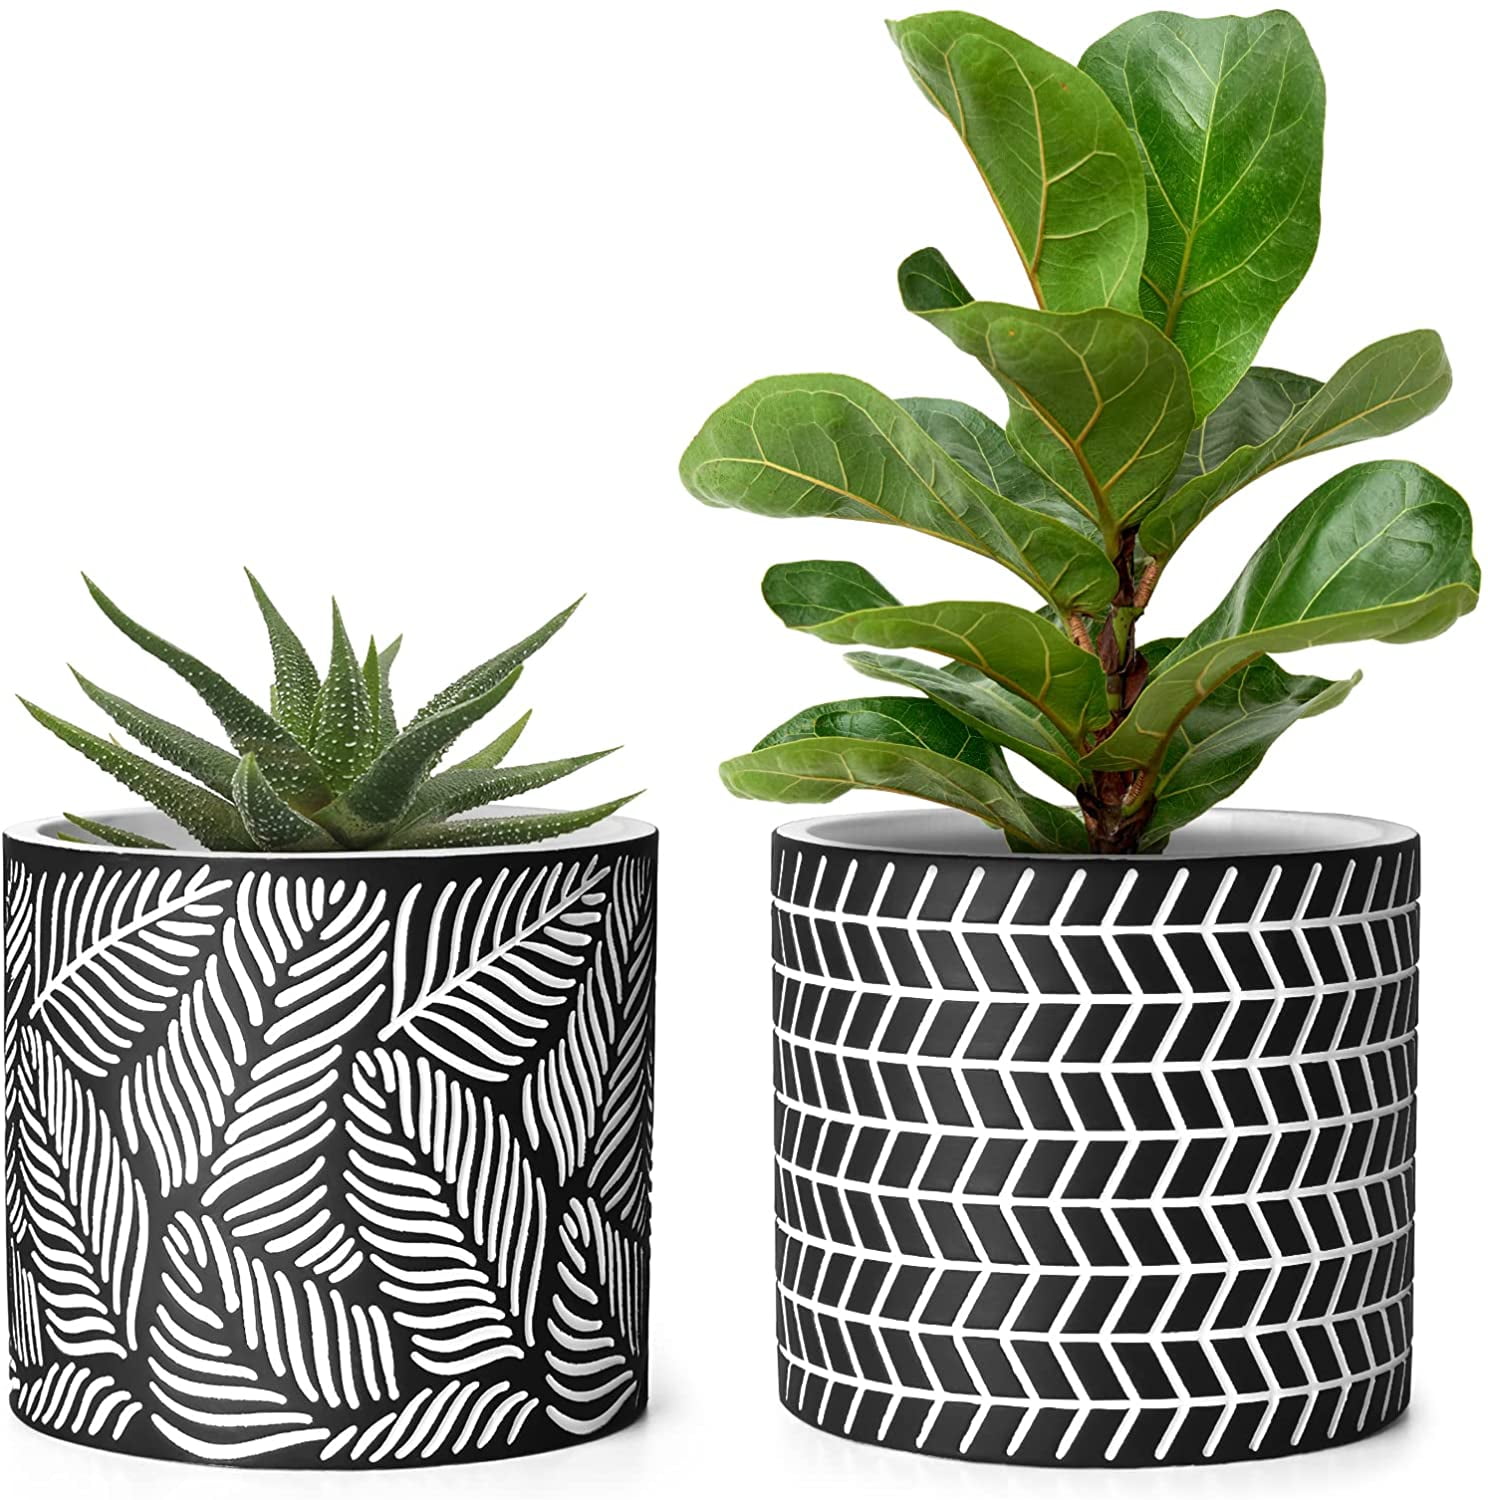 5 Inch Concrete Succulent Flowerpot Bonsai Container with Drainage Holes POTEY 054902, Set of 2, Plant NOT Included Cement Planters Pots for Plants Indoor 